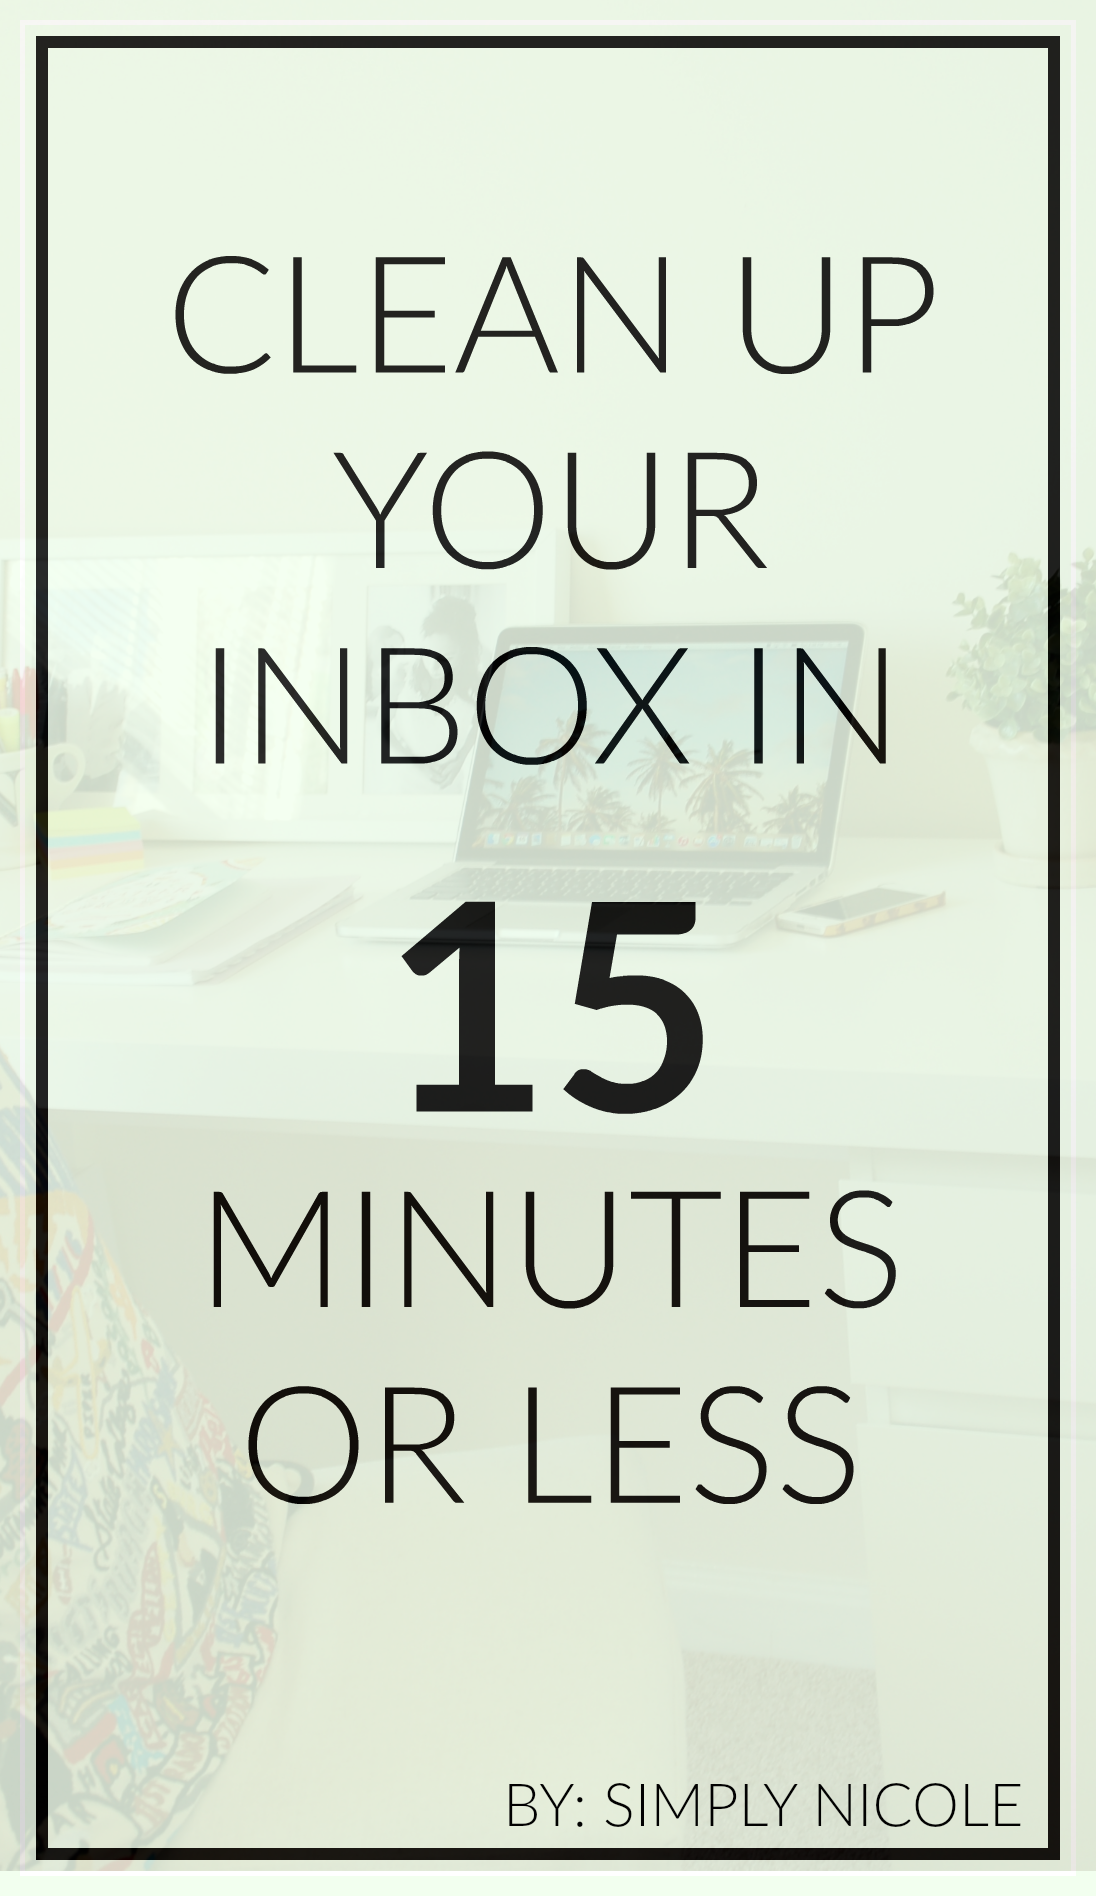 Clean up your inbox in 15 minutes or less